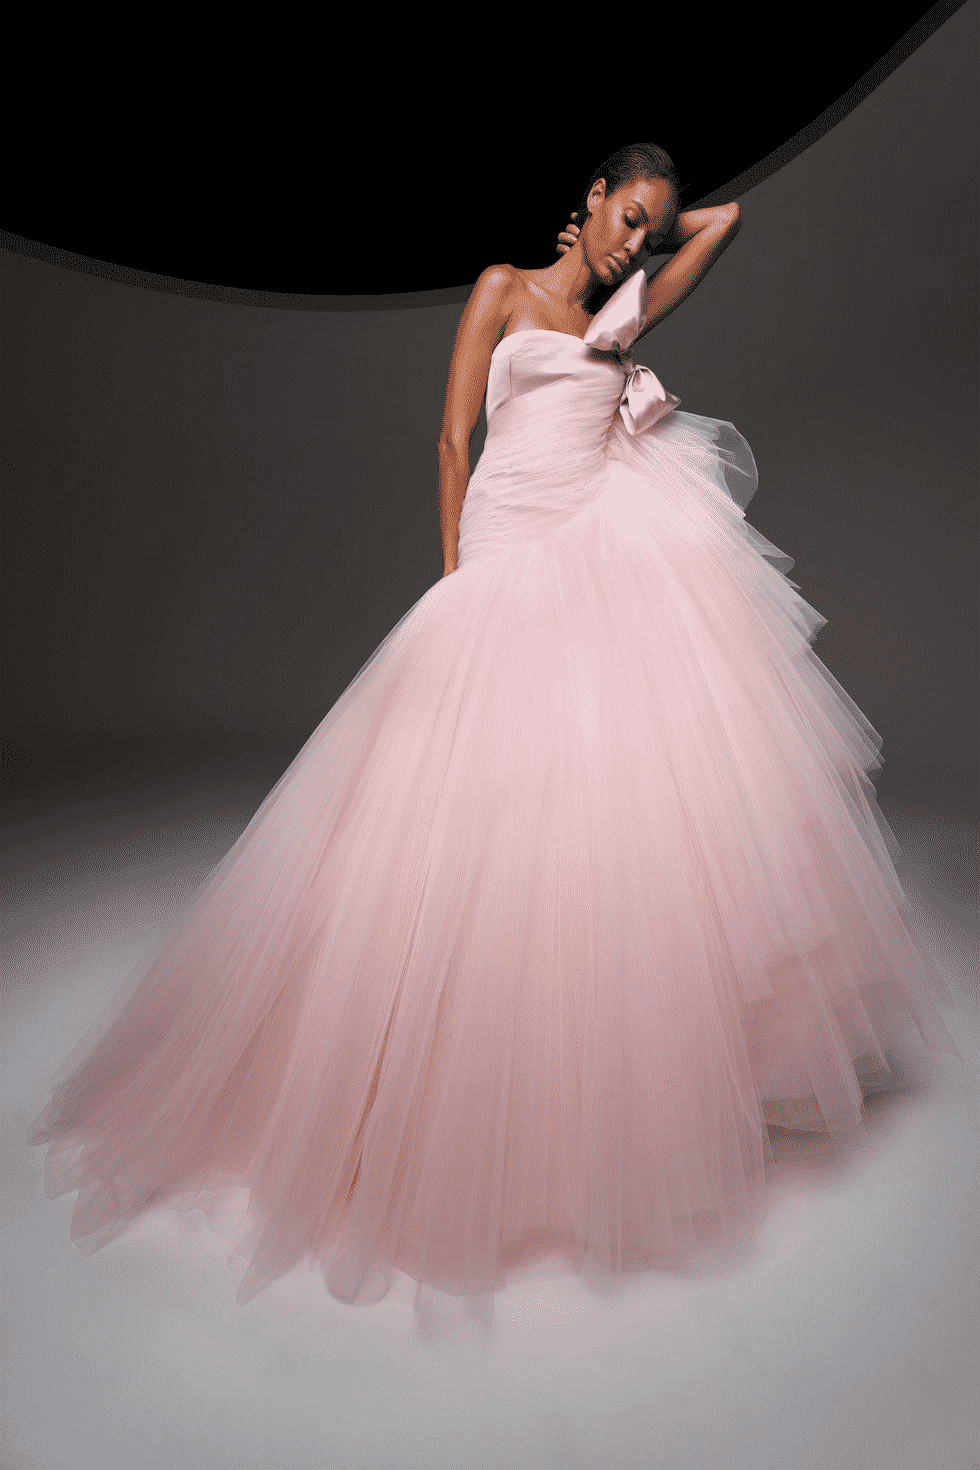 Latest Bridal Gowns - 20 Most Perfect Bridal Gowns this year